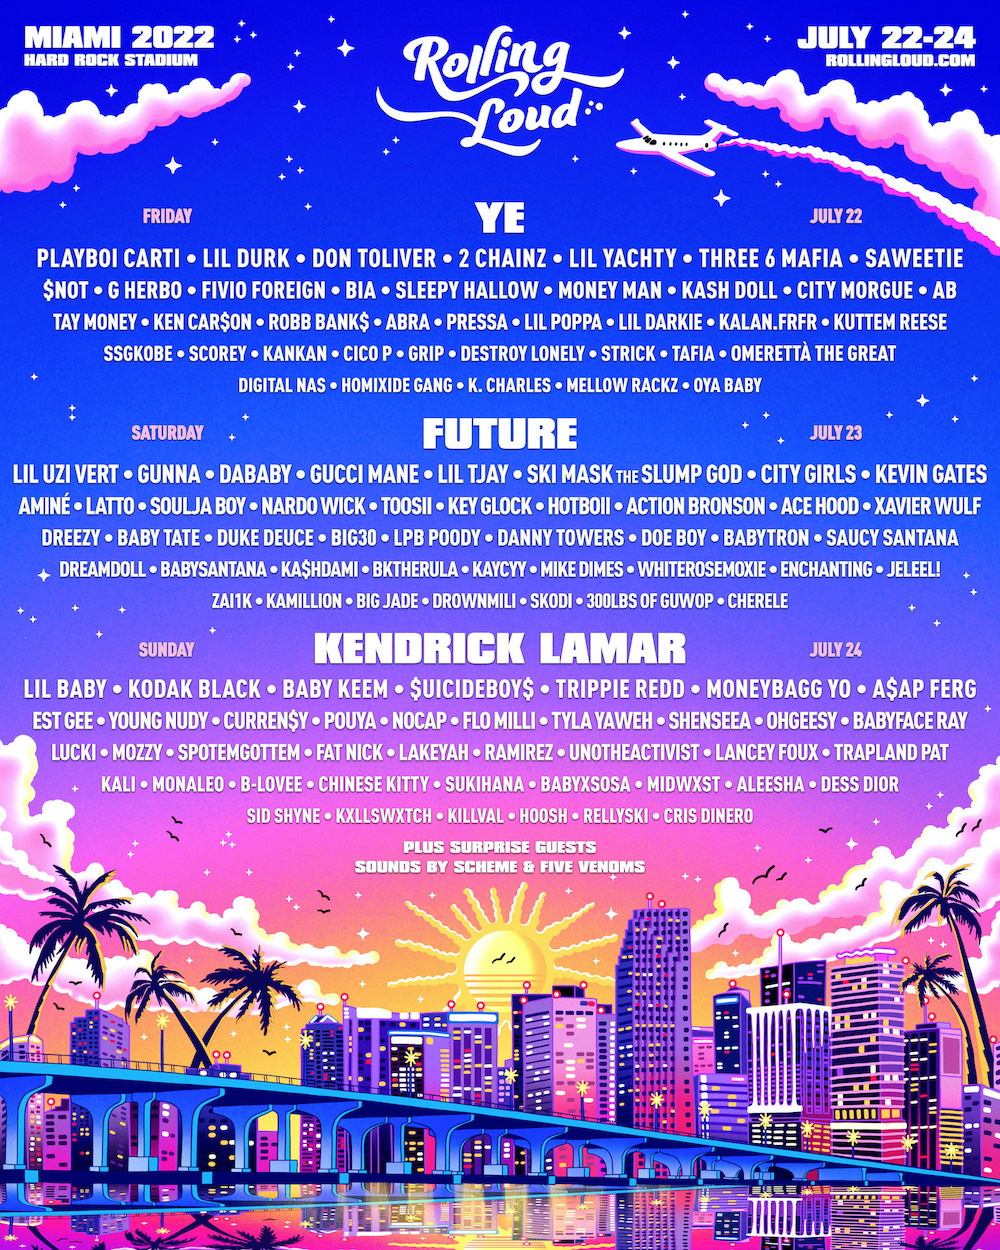 Rolling Loud Miami Lineup 2022 Kanye West, Future, Kendrick Lamar, and